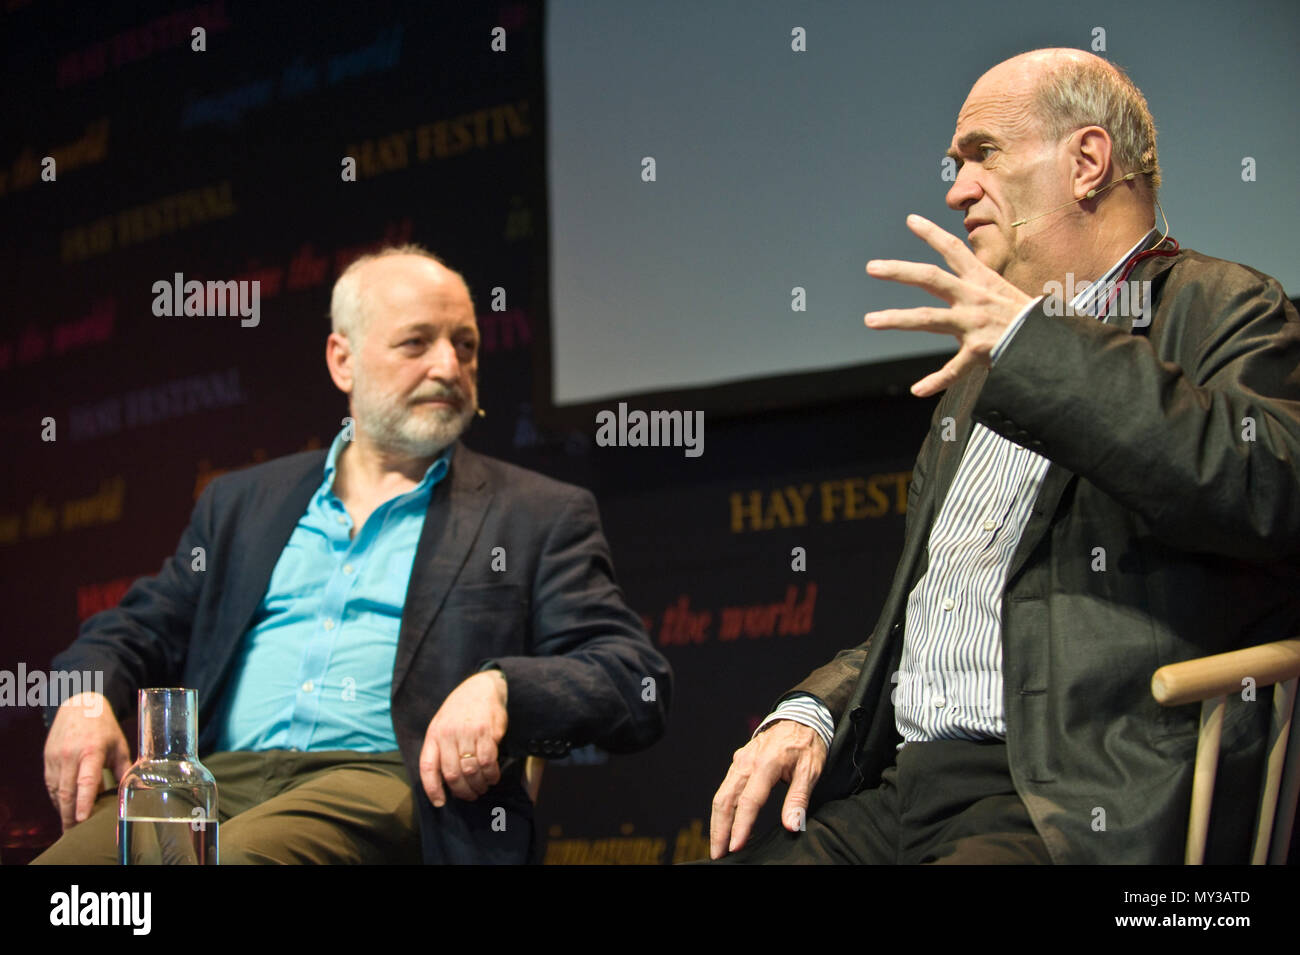 Andre Aciman & Colm Toibin speaking on stage at Hay Festival 2018 Hay-on-Wye Powys Wales UK Stock Photo